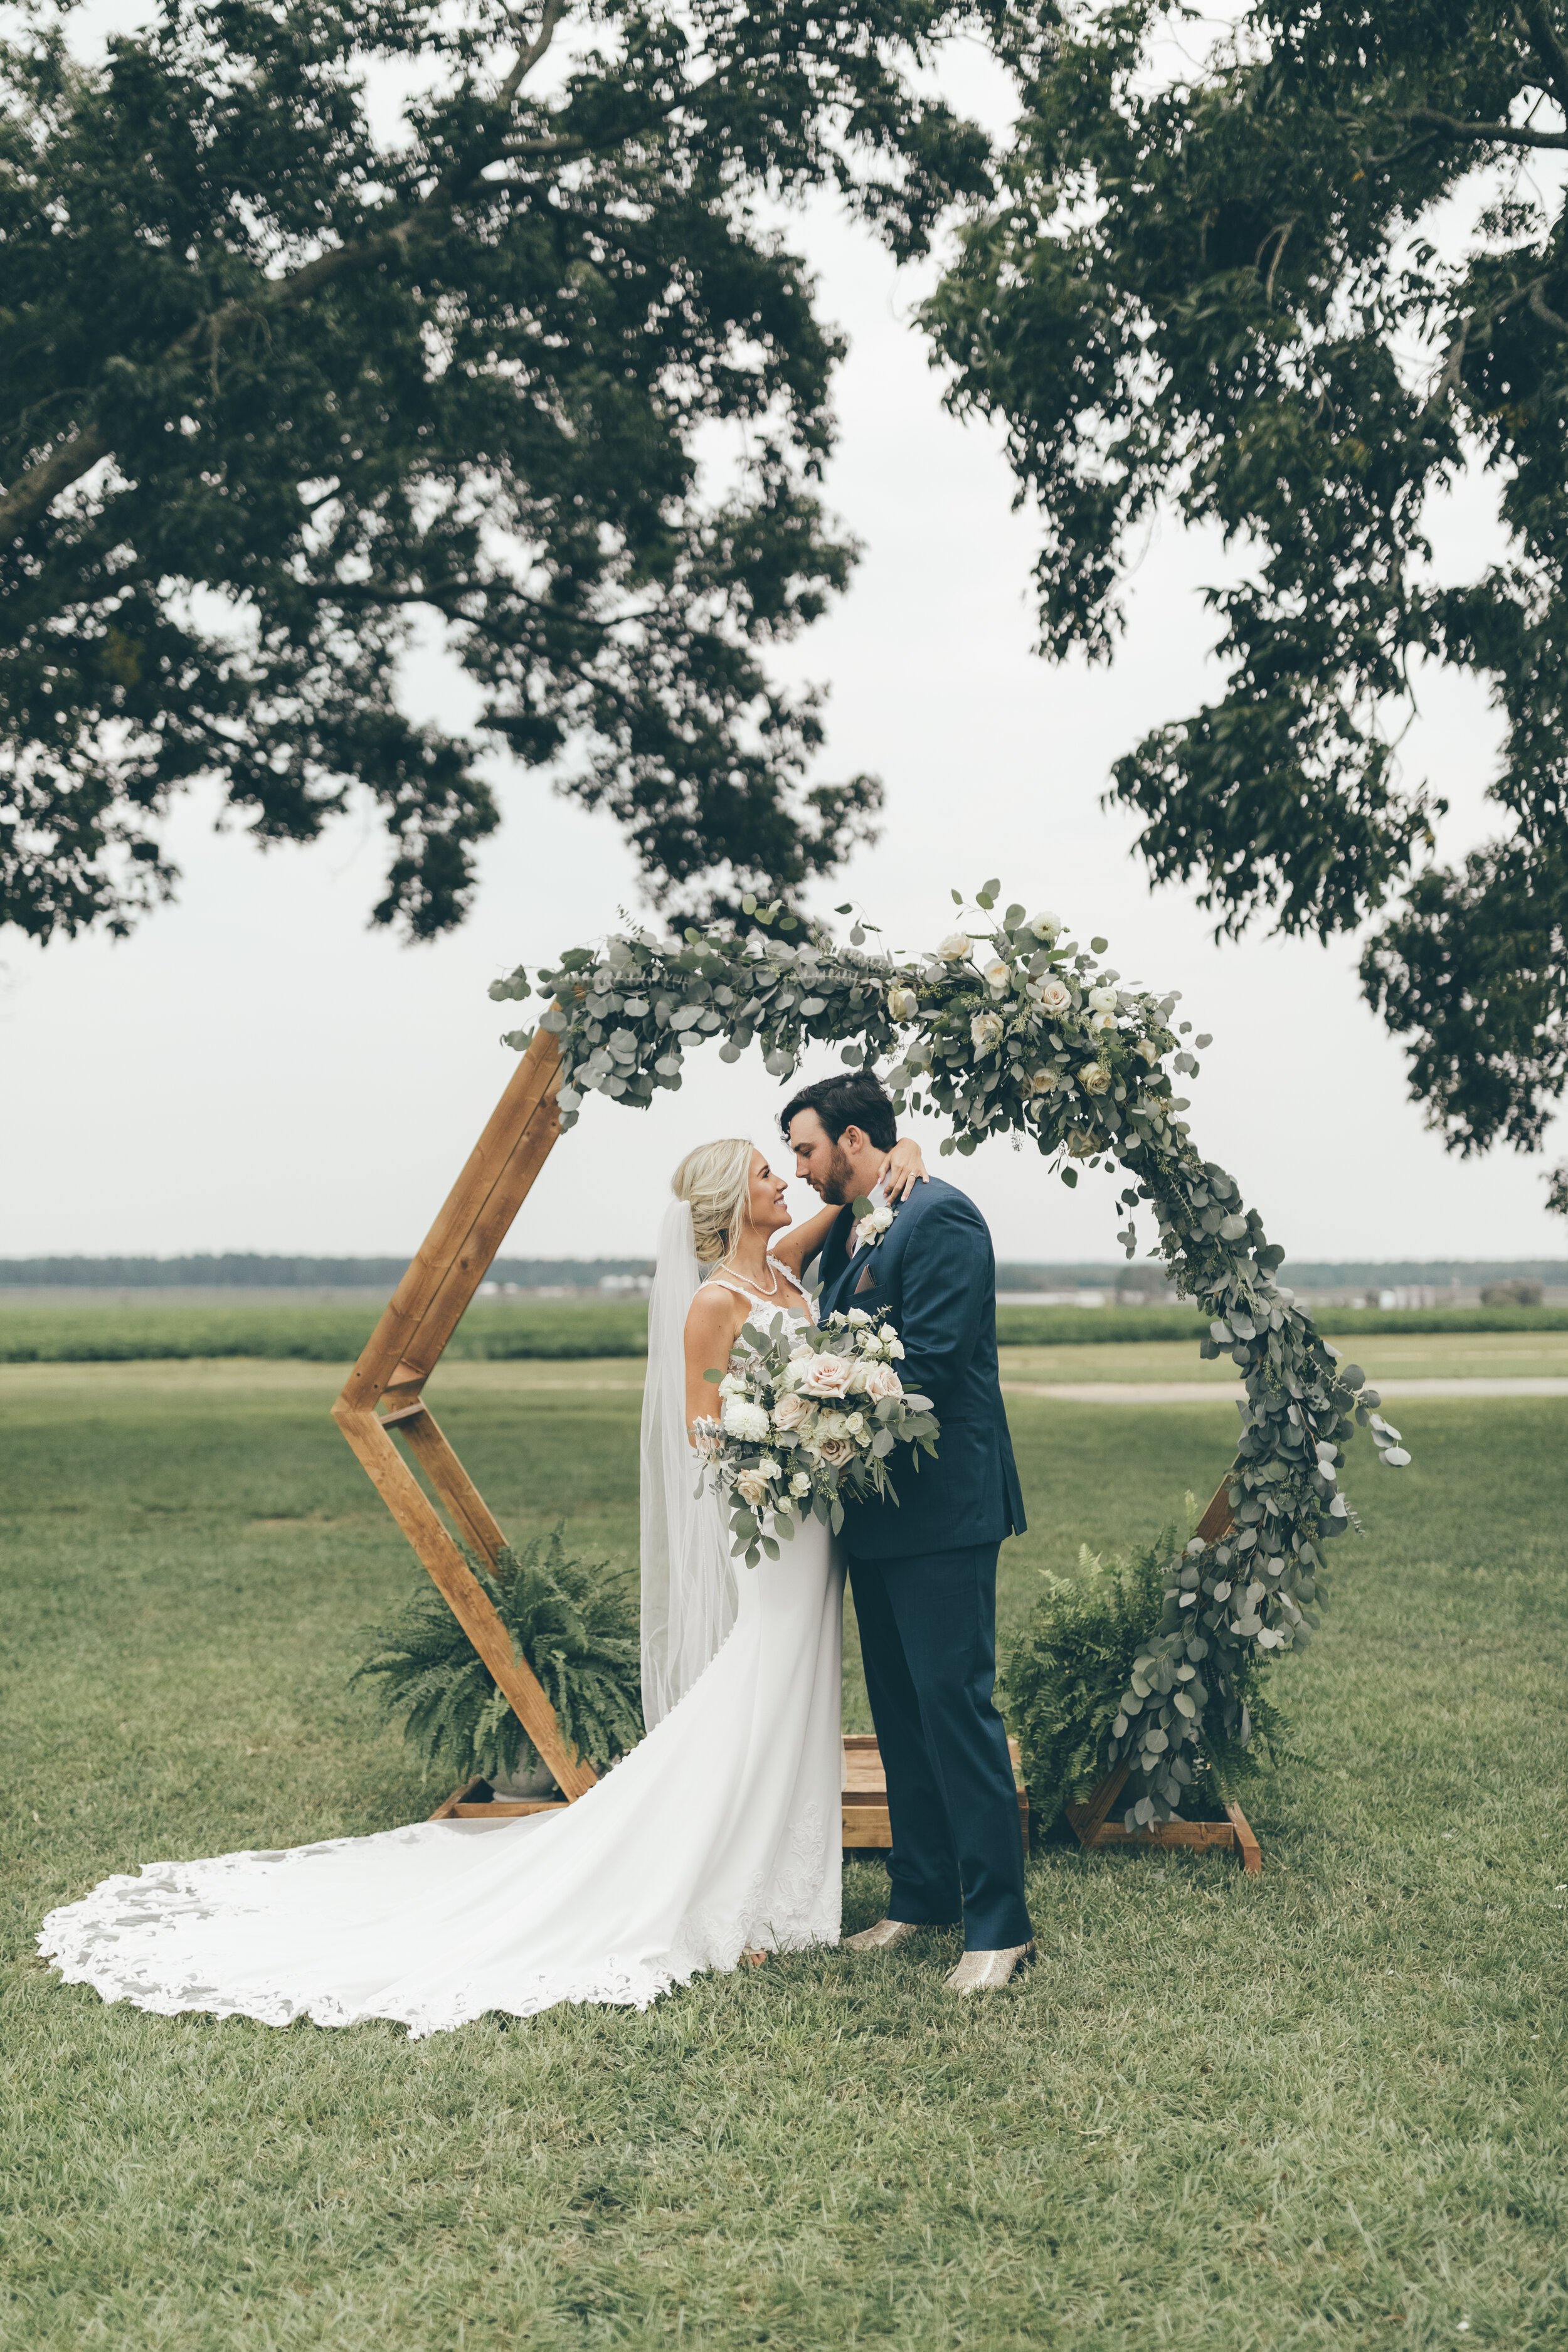 ivory-and-beau-bride-and-florals-real-bride-real-wedding-blog-wedding-dress-bridal-gown-wedding-gown-wedding-flowers-savannah-florist-wedding-florist-maggie-sottero-wedding-dress-organic-natural-wedding-Griffin_0724.jpg